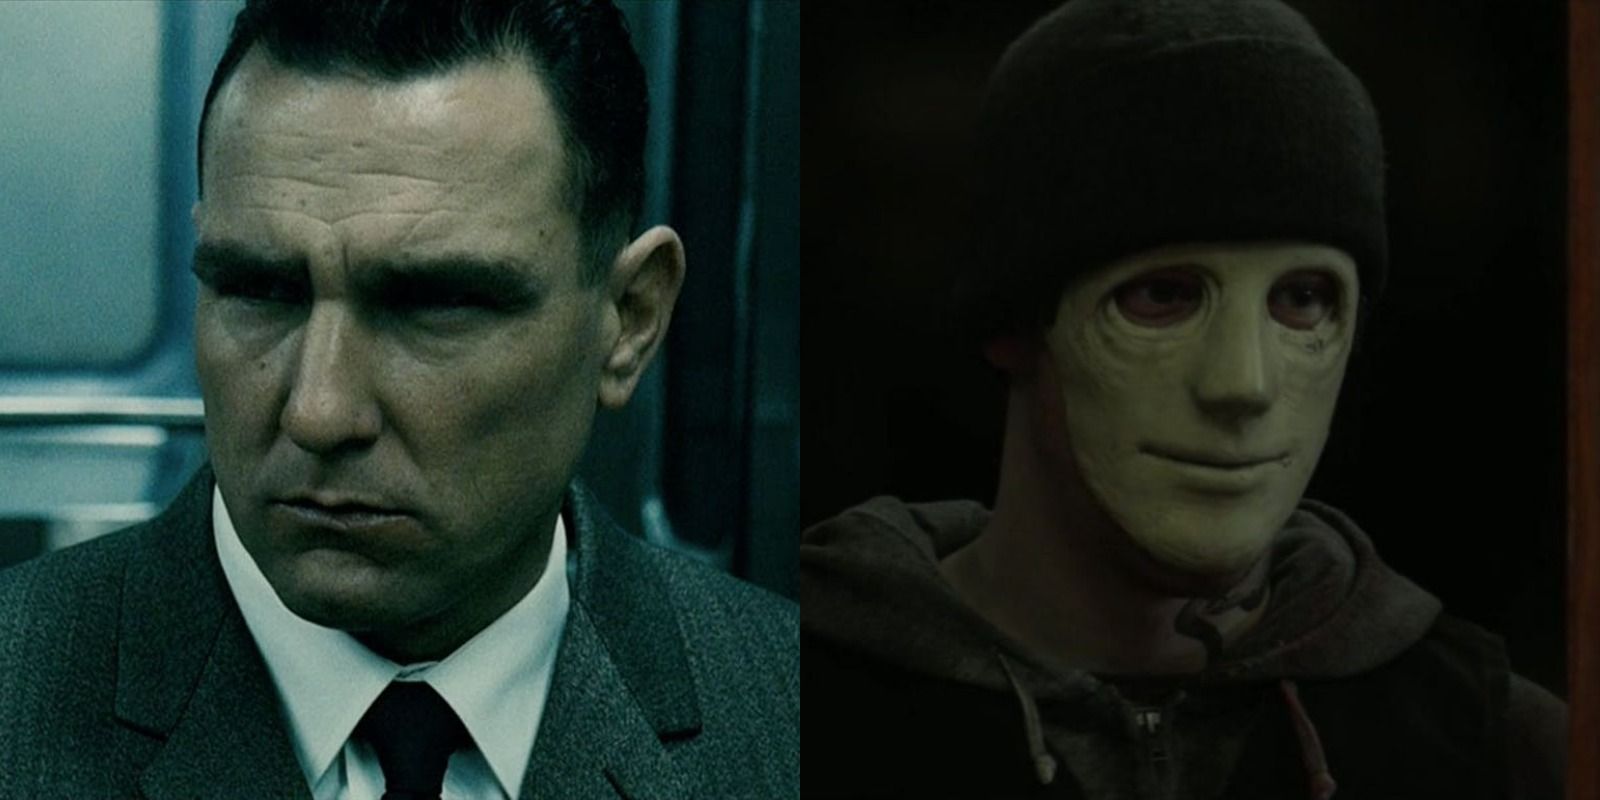 Split image of Mahogany from The Midnight Meat Train and the Masked Man from Hush